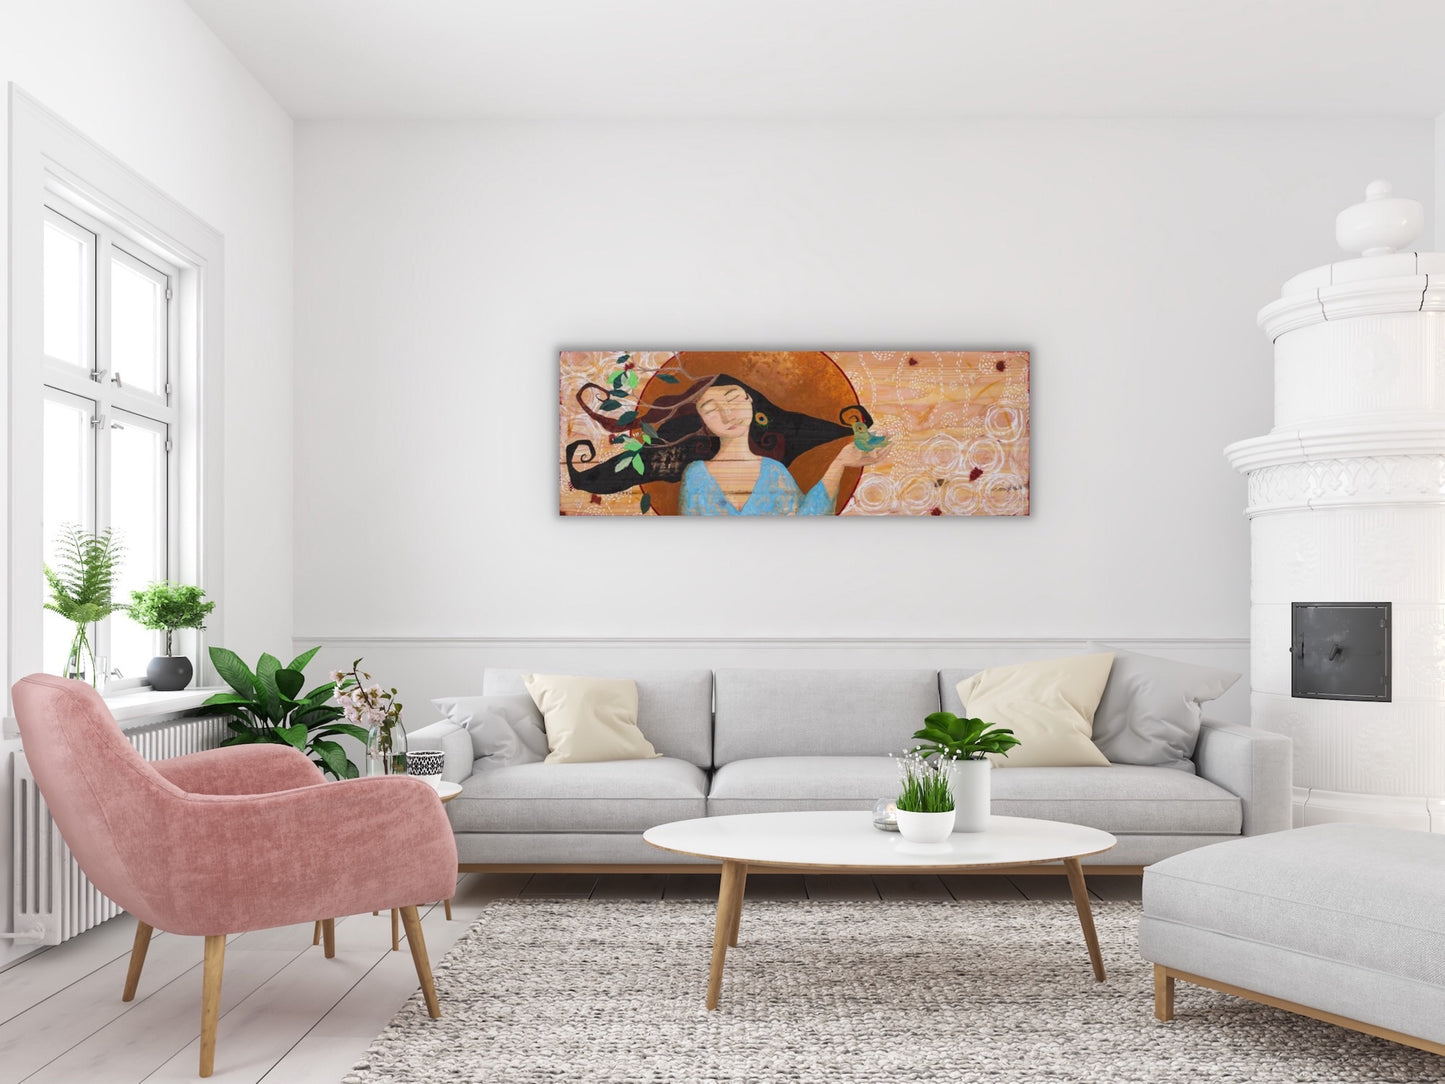 large mixed media painting on wood depicting a beautiful woman holding a bird in her hand.  The painting is on the wall of a living room with white furniture, a pink chair and green plants